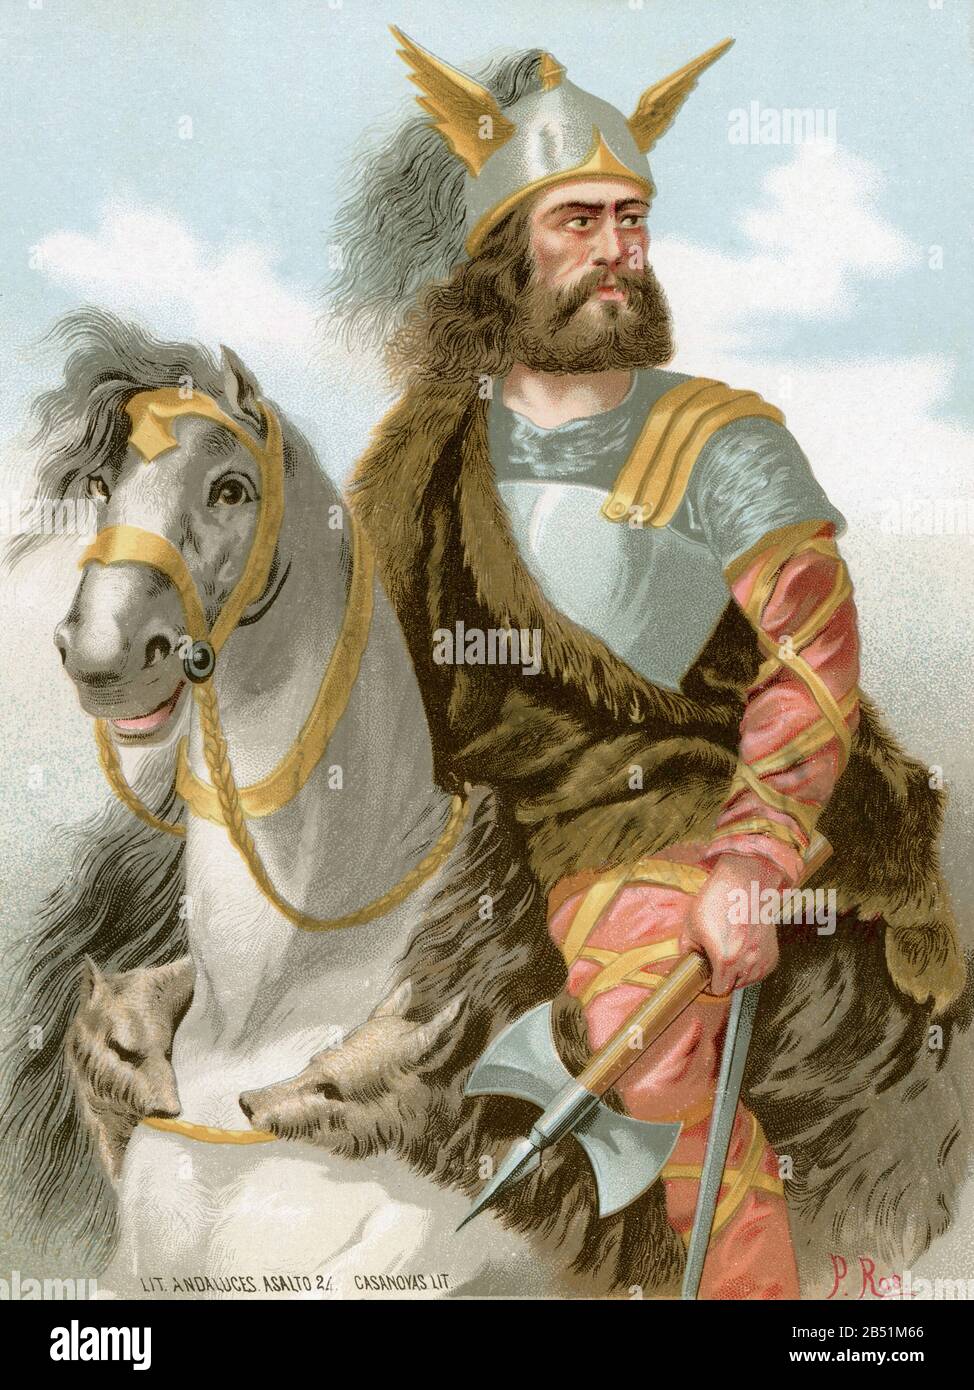 Old color lithography portrait. Viriato. Viriatus, Viriathus was a Lusitanian leader, who faced the expansion of Rome in Hispania in the middle of the Stock Photo